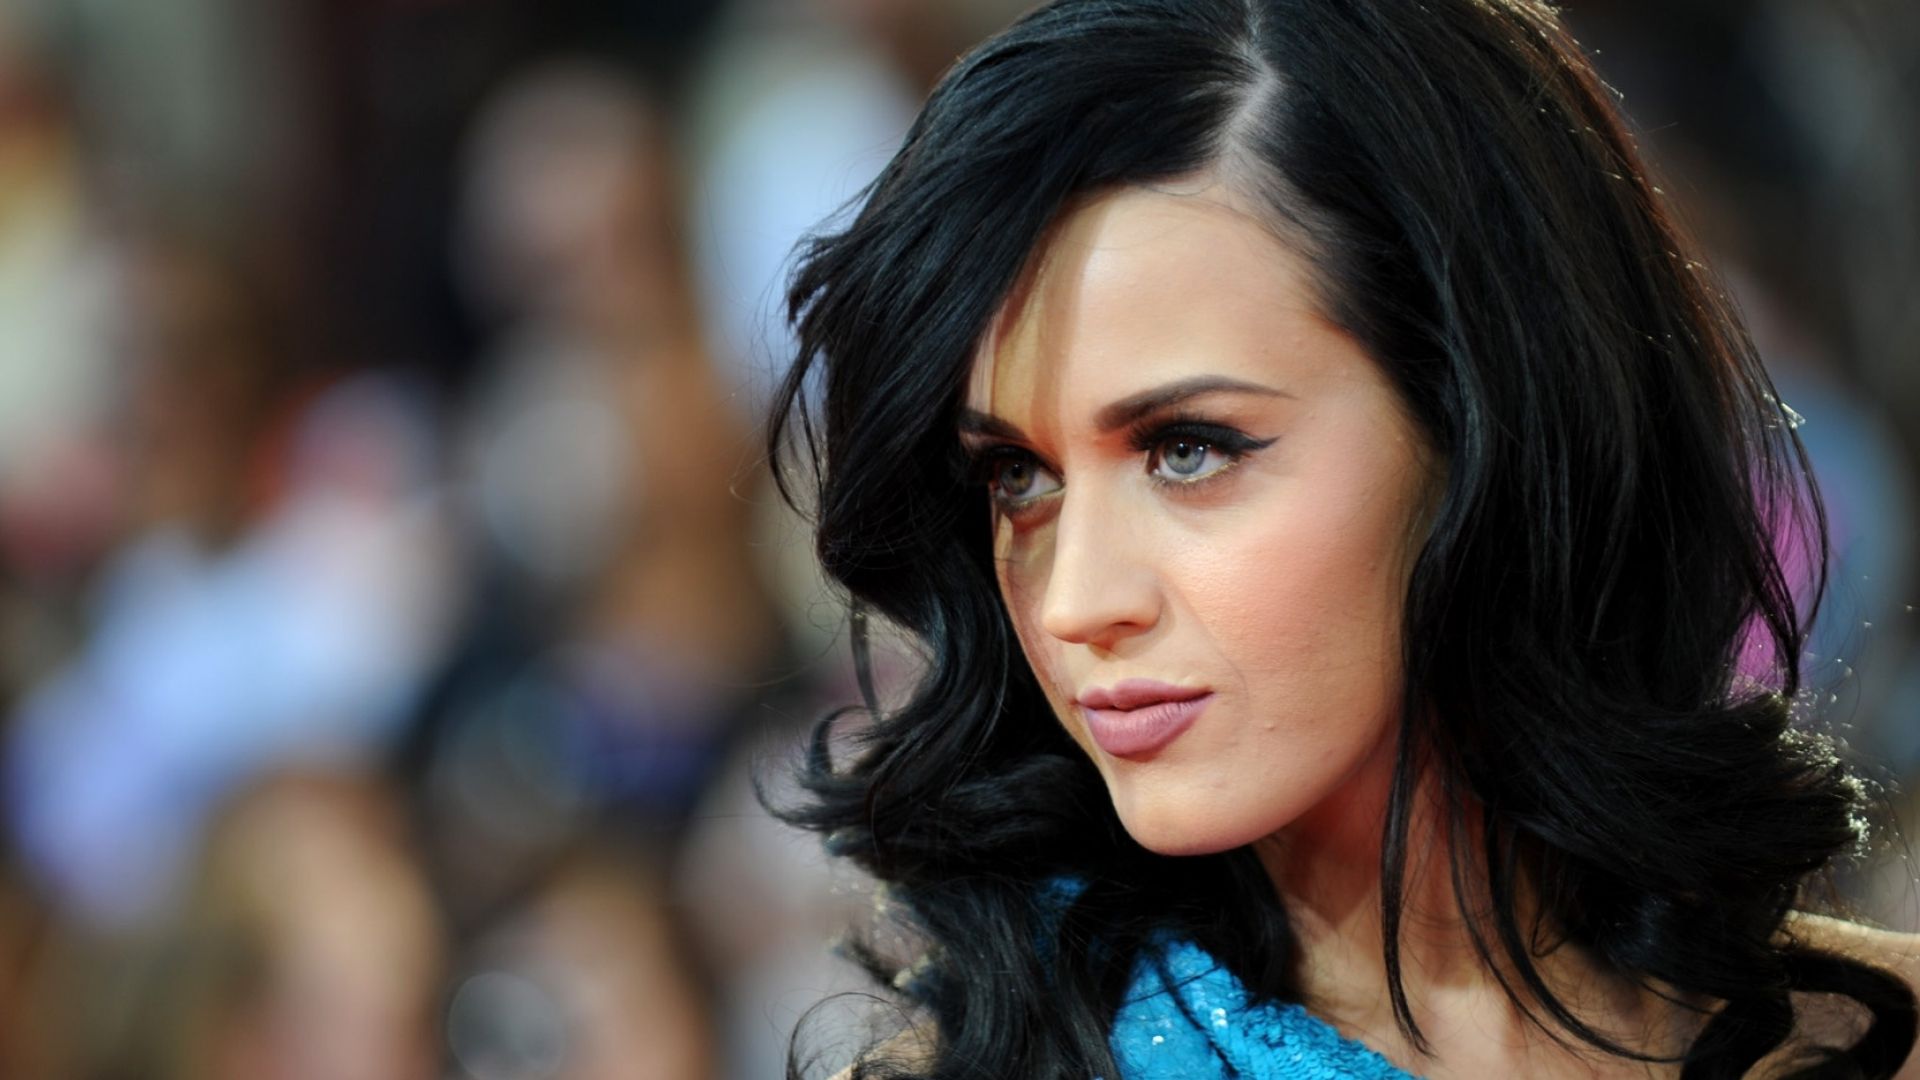 Katy Perry Face Wallpaper